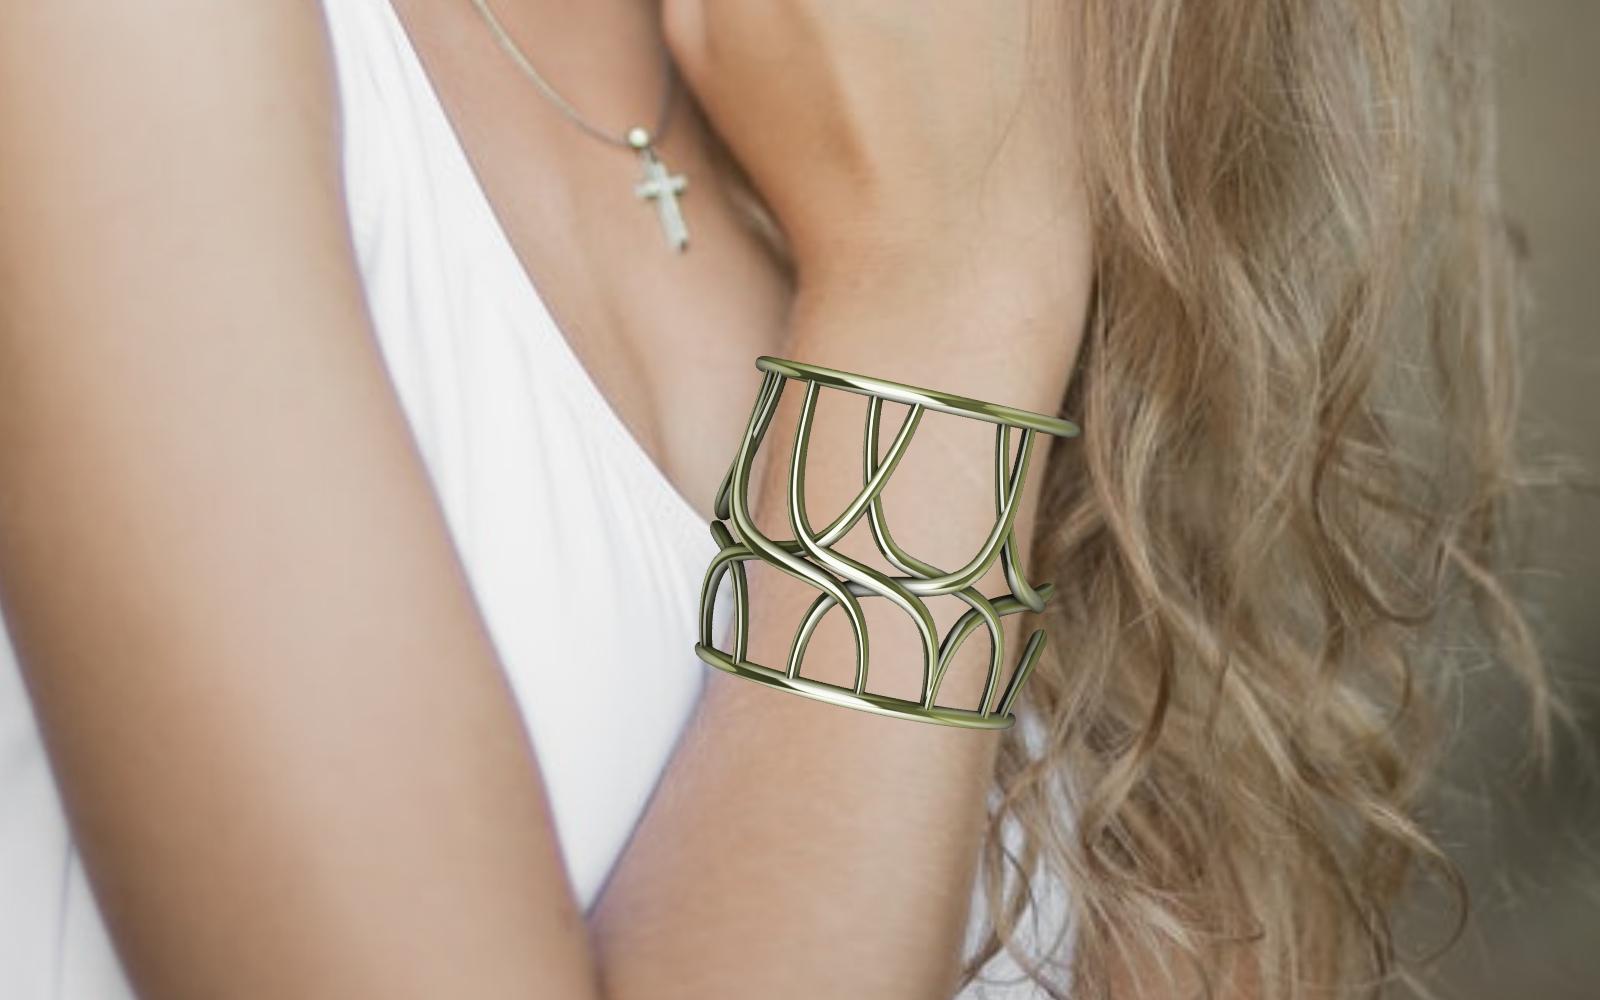 10K Green Gold Cuff Bracelet, October the best month to launch the Octopus Cuff.  So what Summer's over, you can still create your own waves this winter with this bracelet. Organic lines of waves rolling over your wrist . Warm up your dreary days